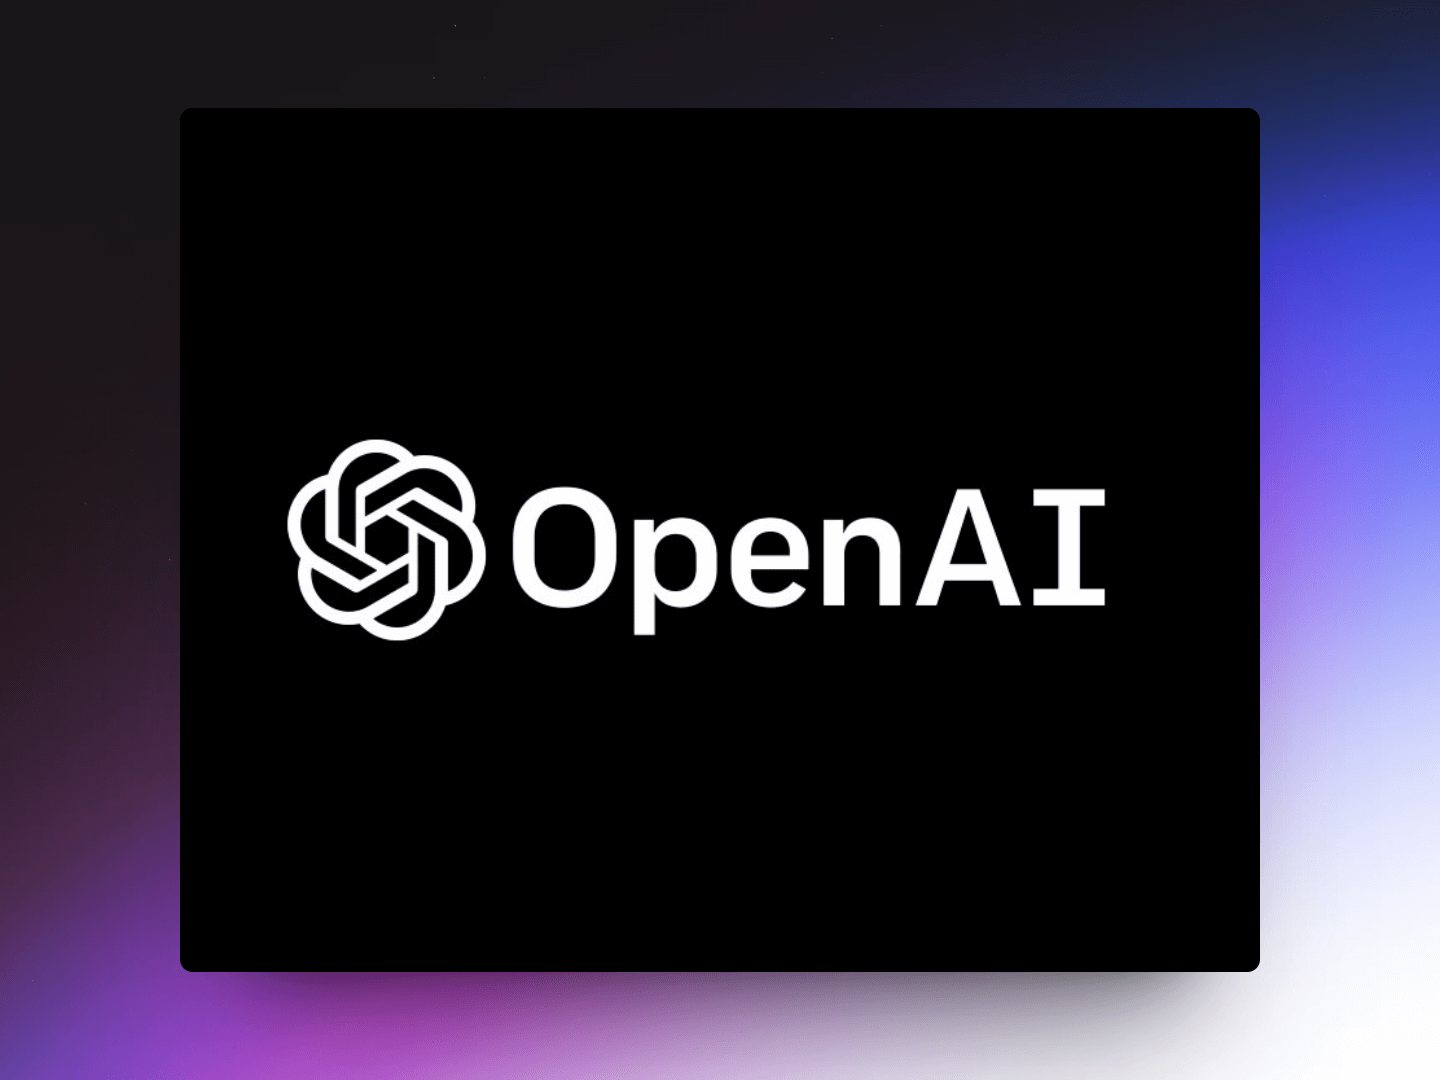 Powered by OpenAI GPT-4